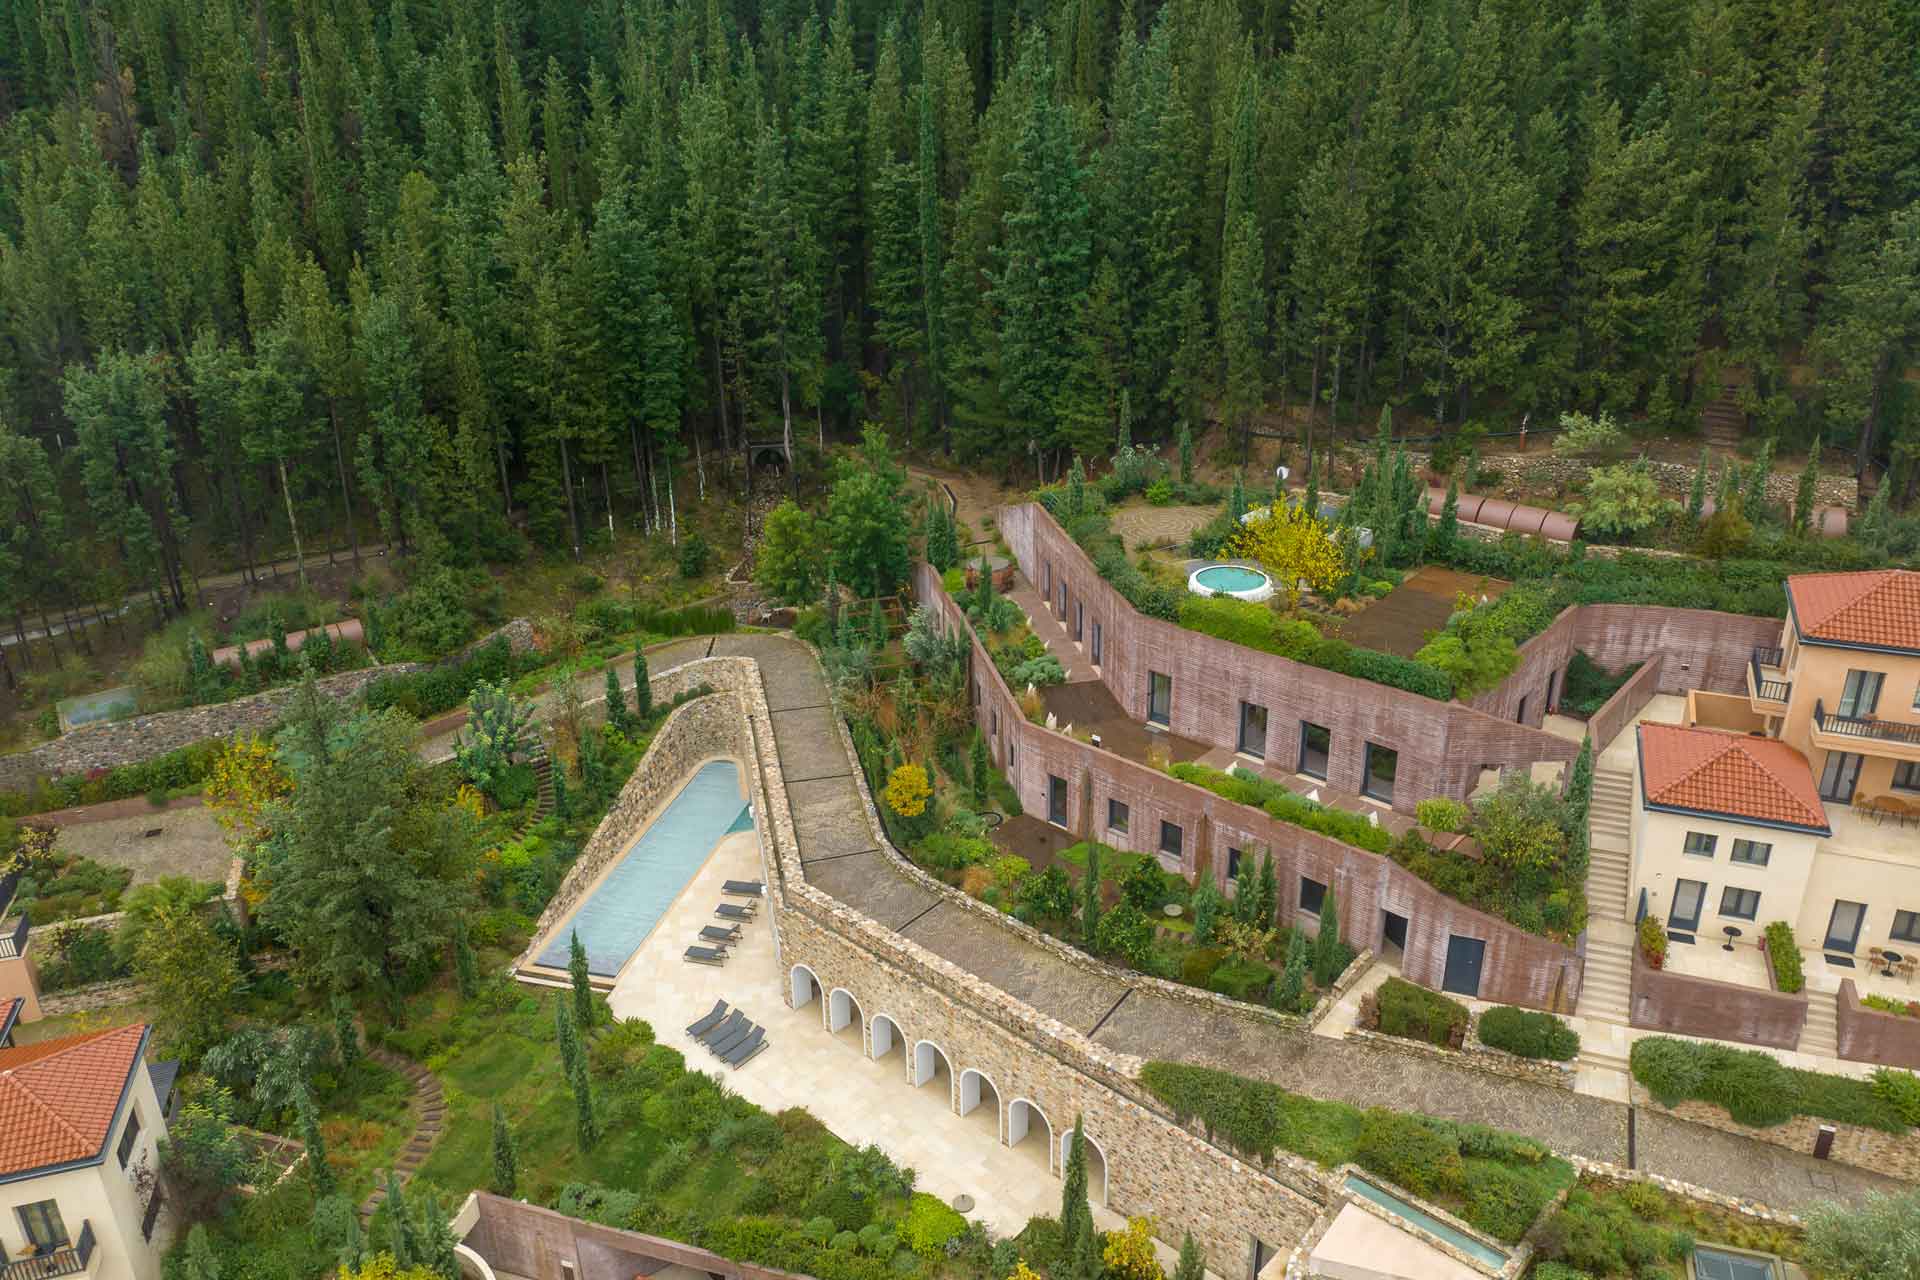 Aerial view of Euphoria Retreat Wellness Resort in the Spartan mountains.